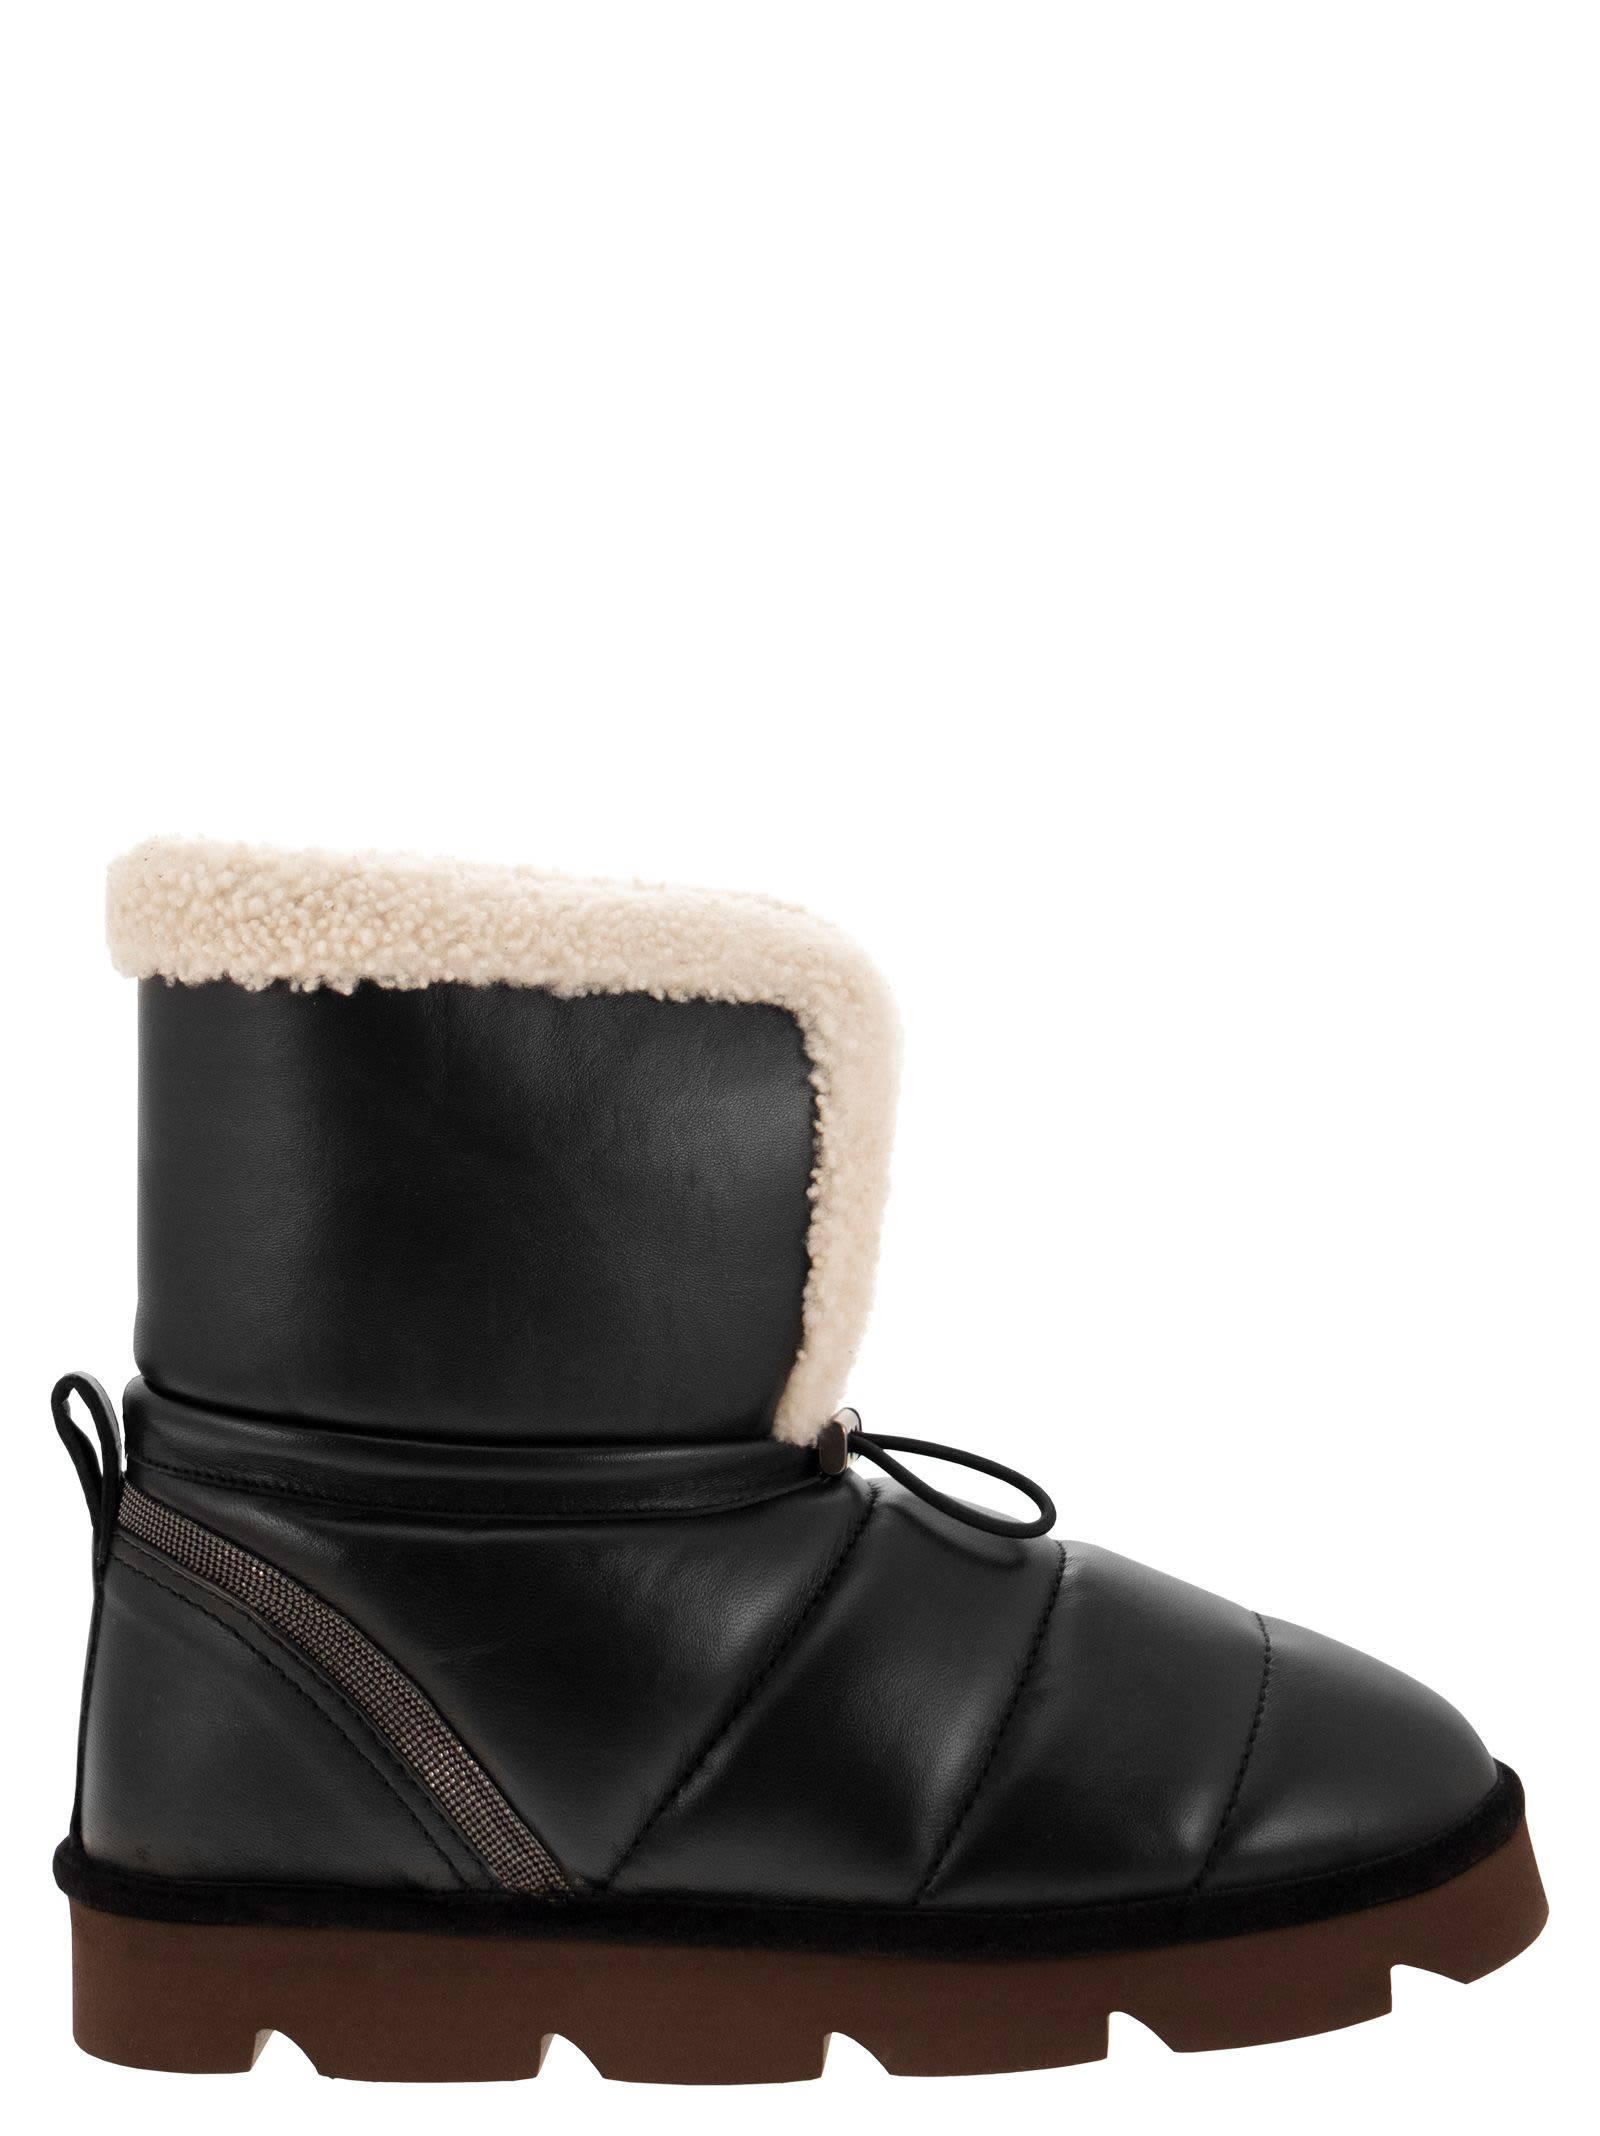 BRUNELLO CUCINELLI LEATHER BOOT WITH SHEARLING LINING AND SHINY DETAILS